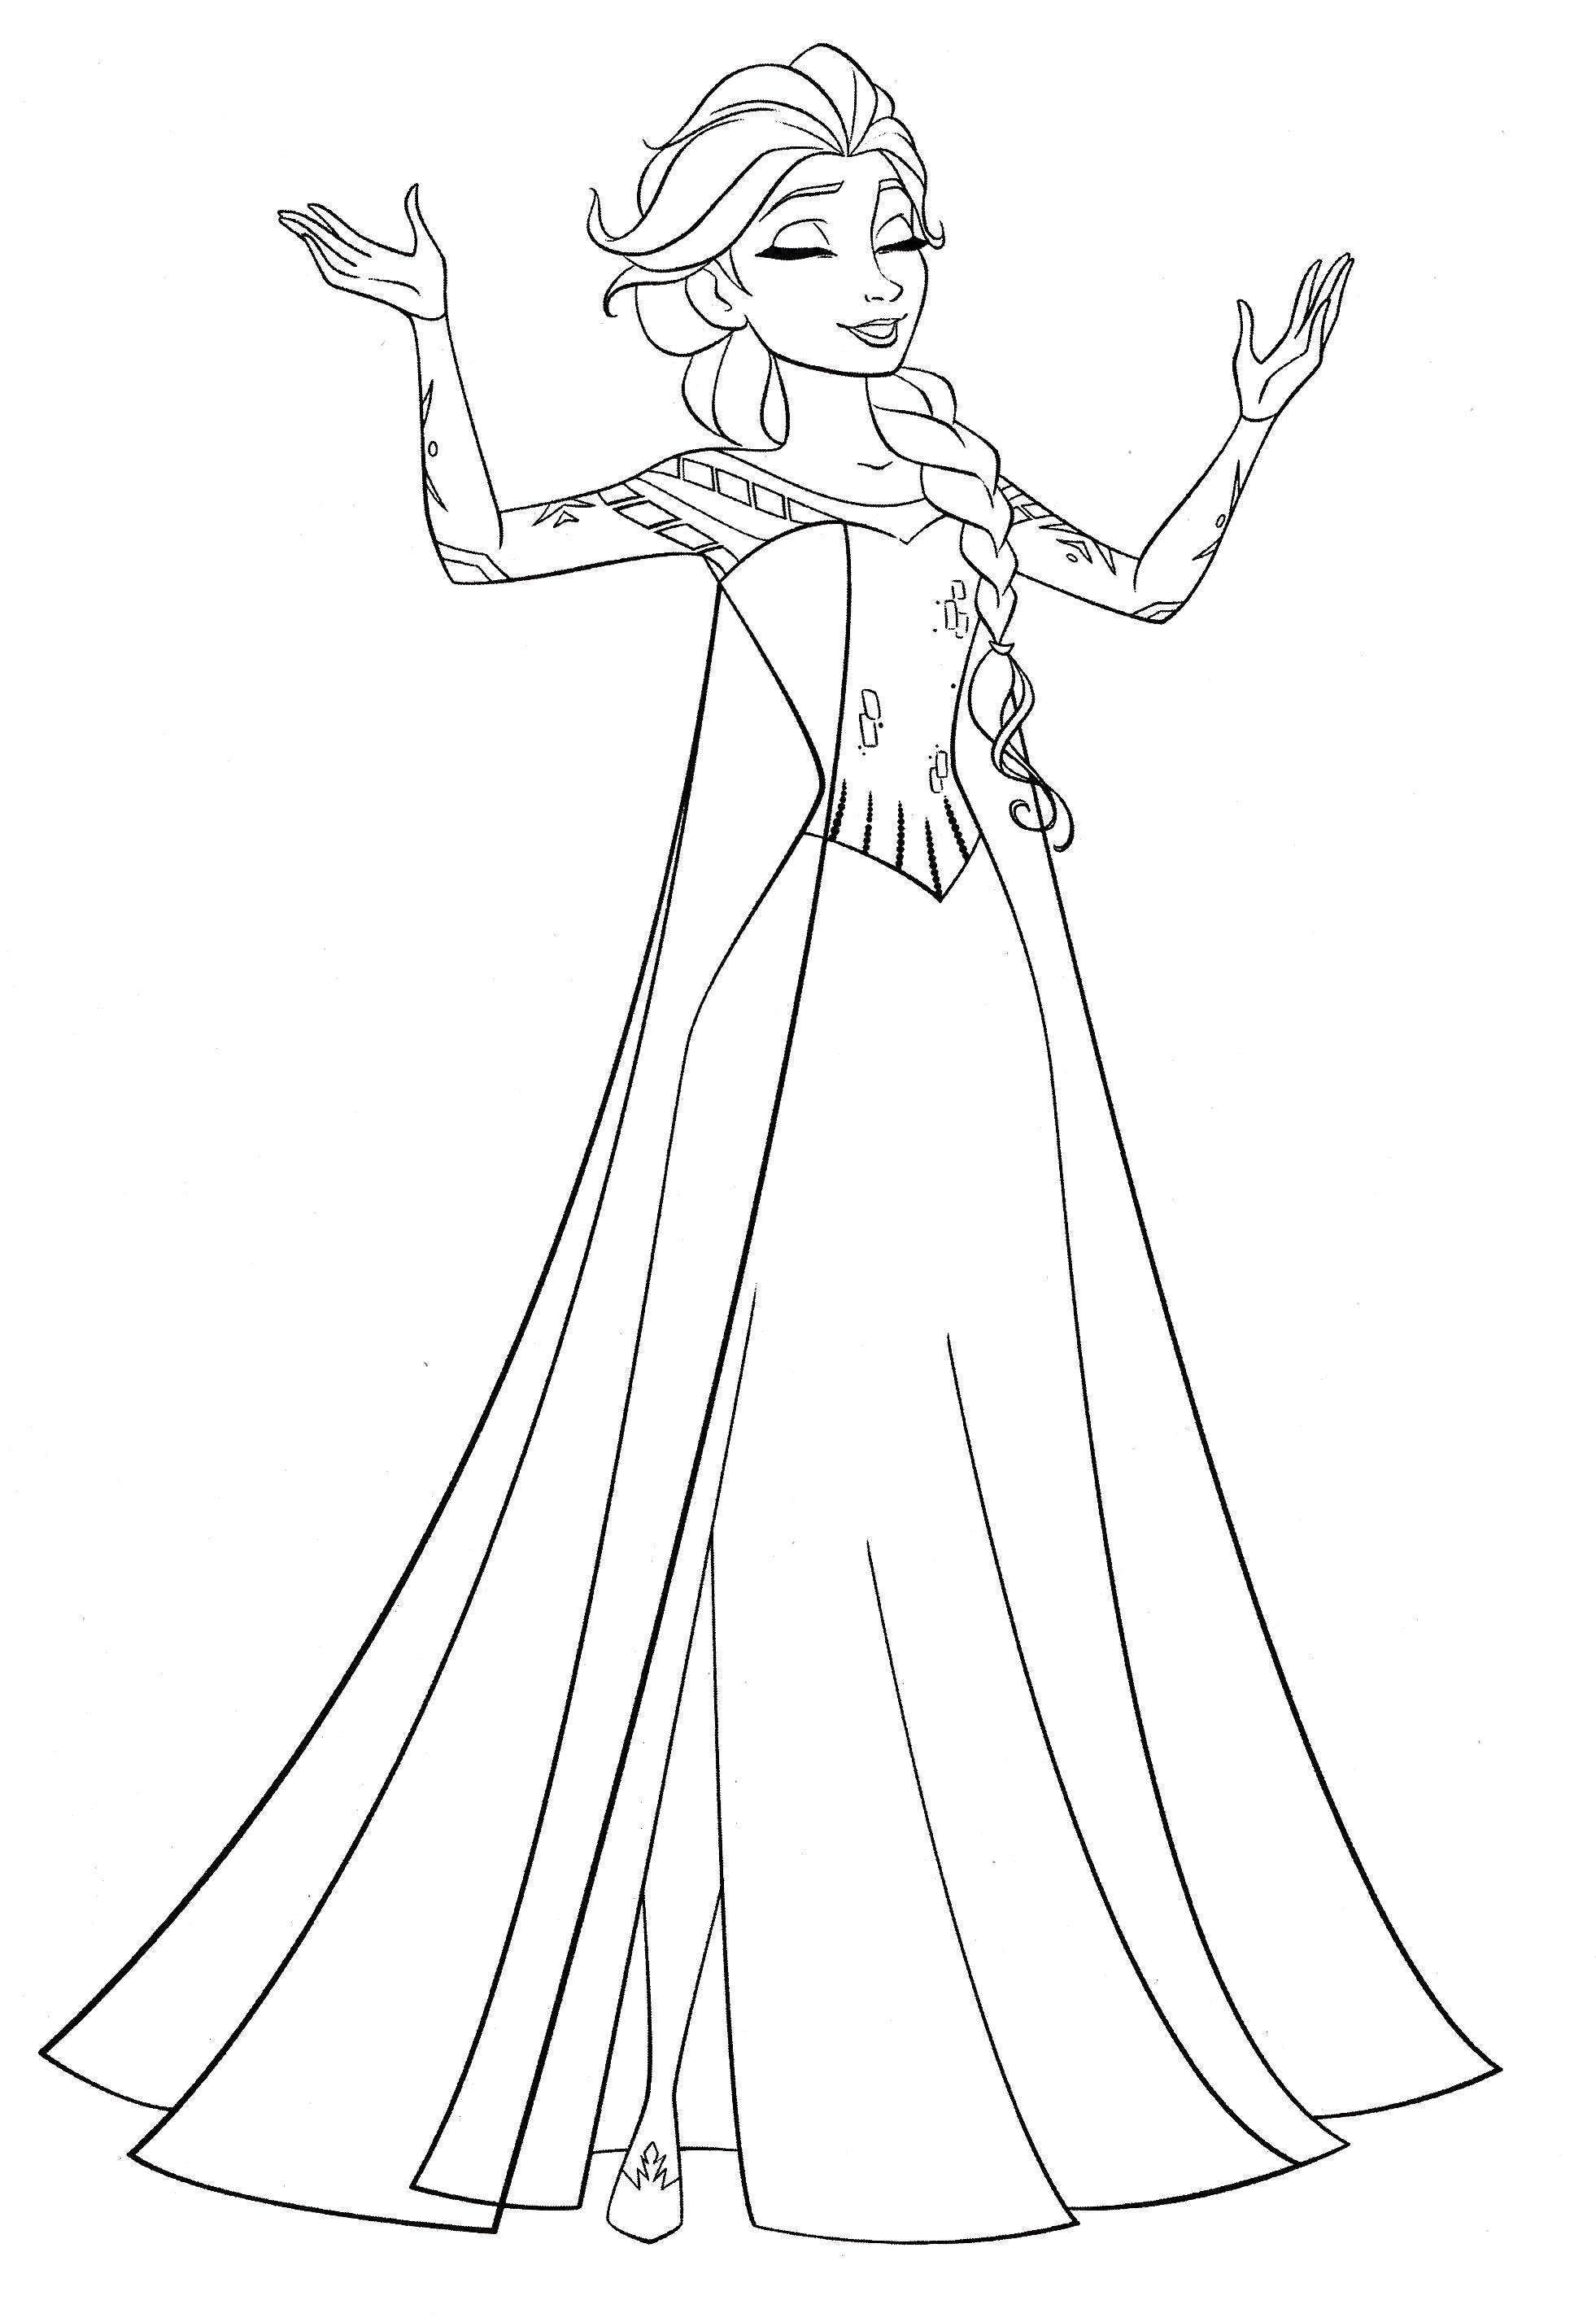 Coloring Elsa from the cartoon the cold heart . Category Disney coloring pages. Tags:  Disney, Elsa, frozen, Princess.